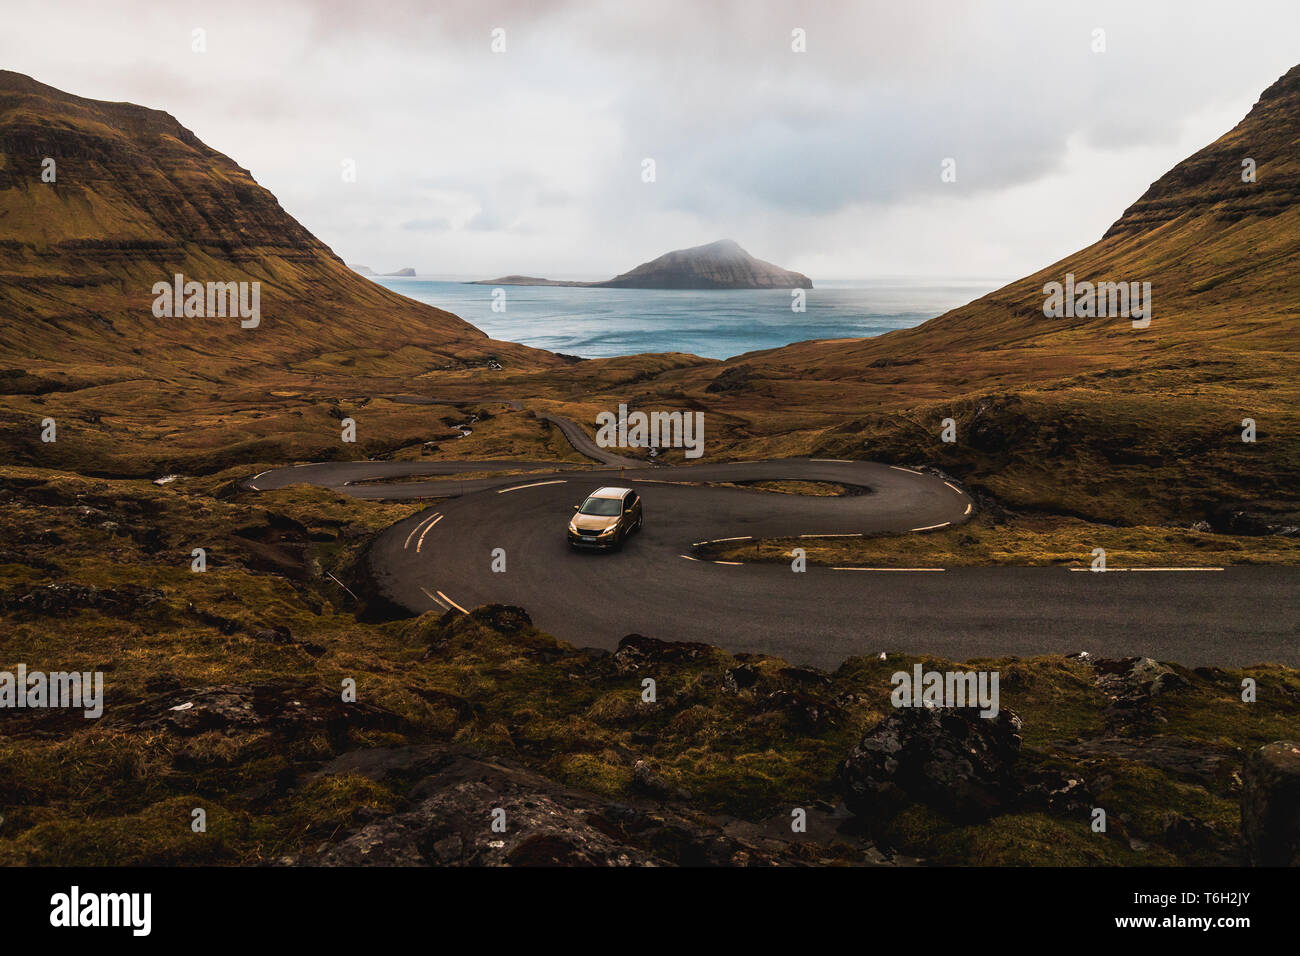 Car driving up serpentines on the island Streymoy near the village Norðradalur with view of Koltur island (Faroe Islands, Denmark, Europe) Stock Photo